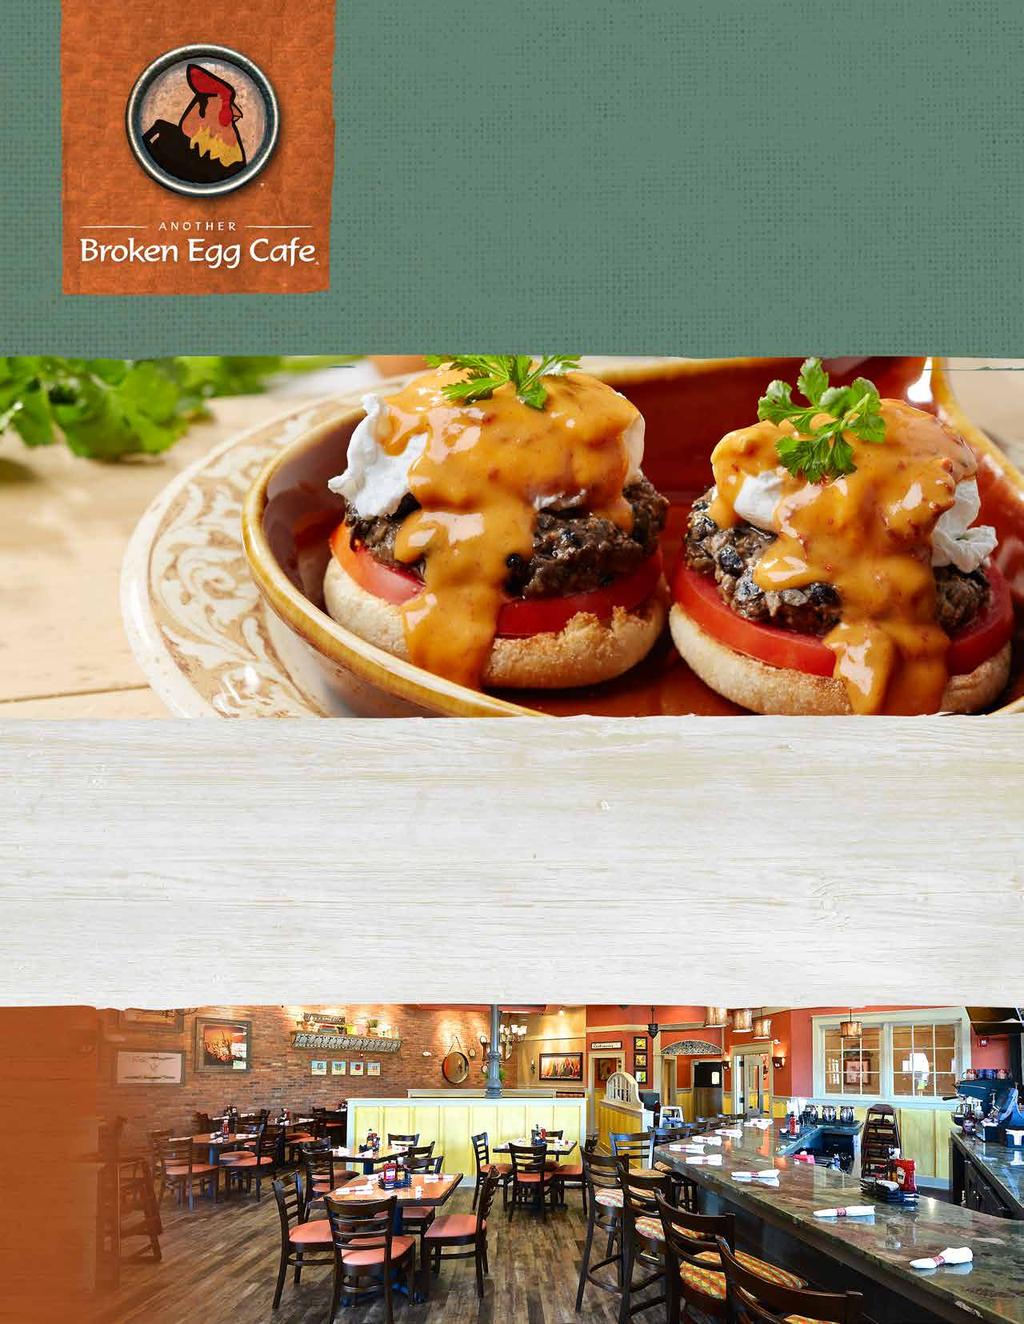 Another Broken Egg Cafe is one of the fastest growing concepts in the breakfast, brunch and lunch segment of the restaurant industry.